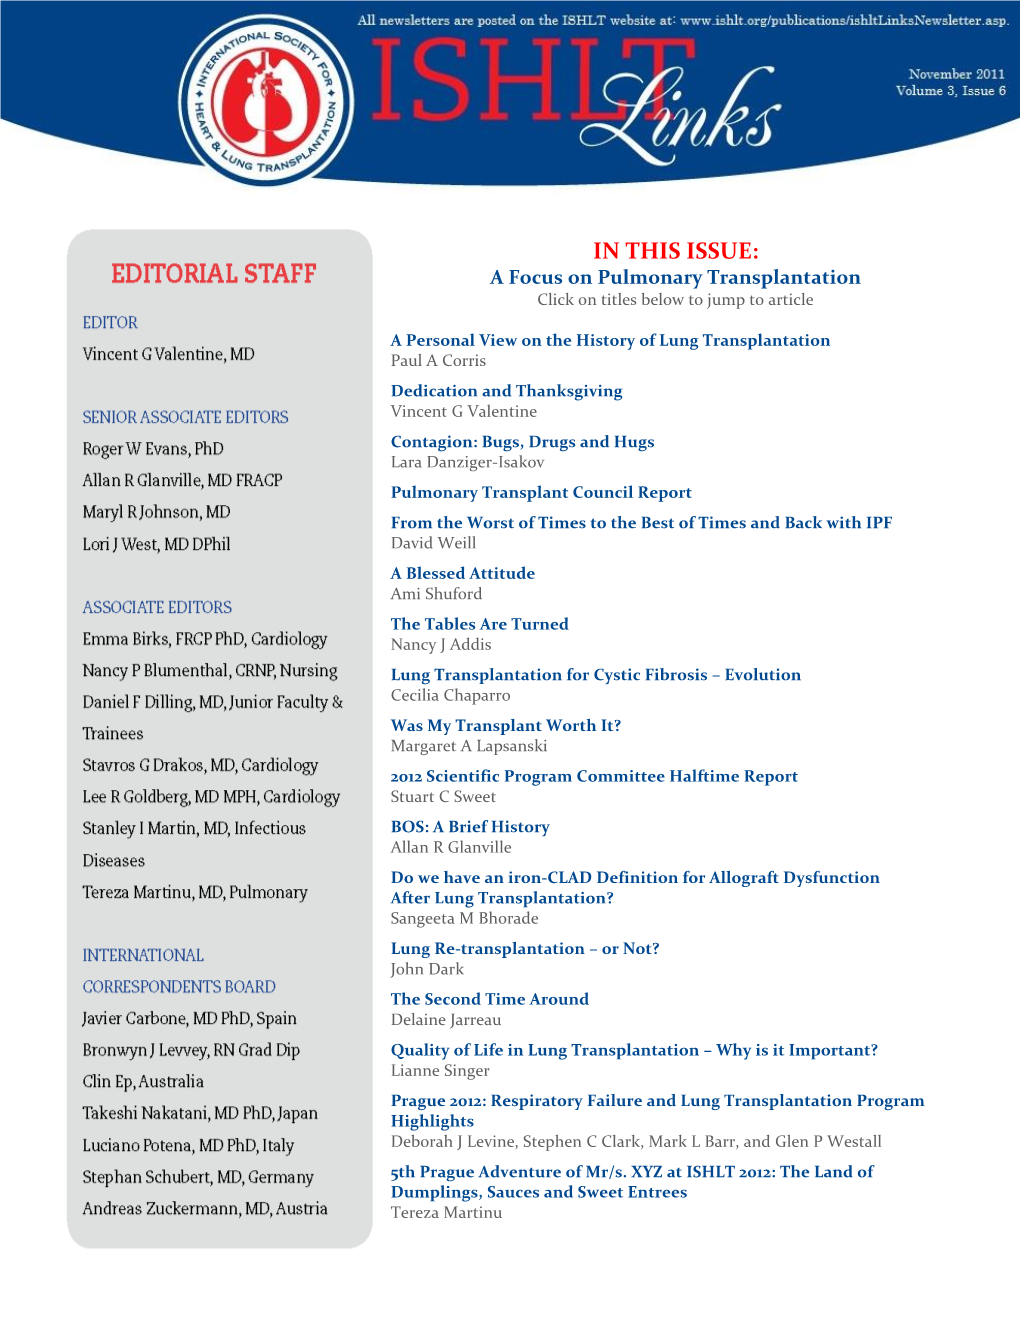 IN THIS ISSUE: a Focus on Pulmonary Transplantation Click on Titles Below to Jump to Article